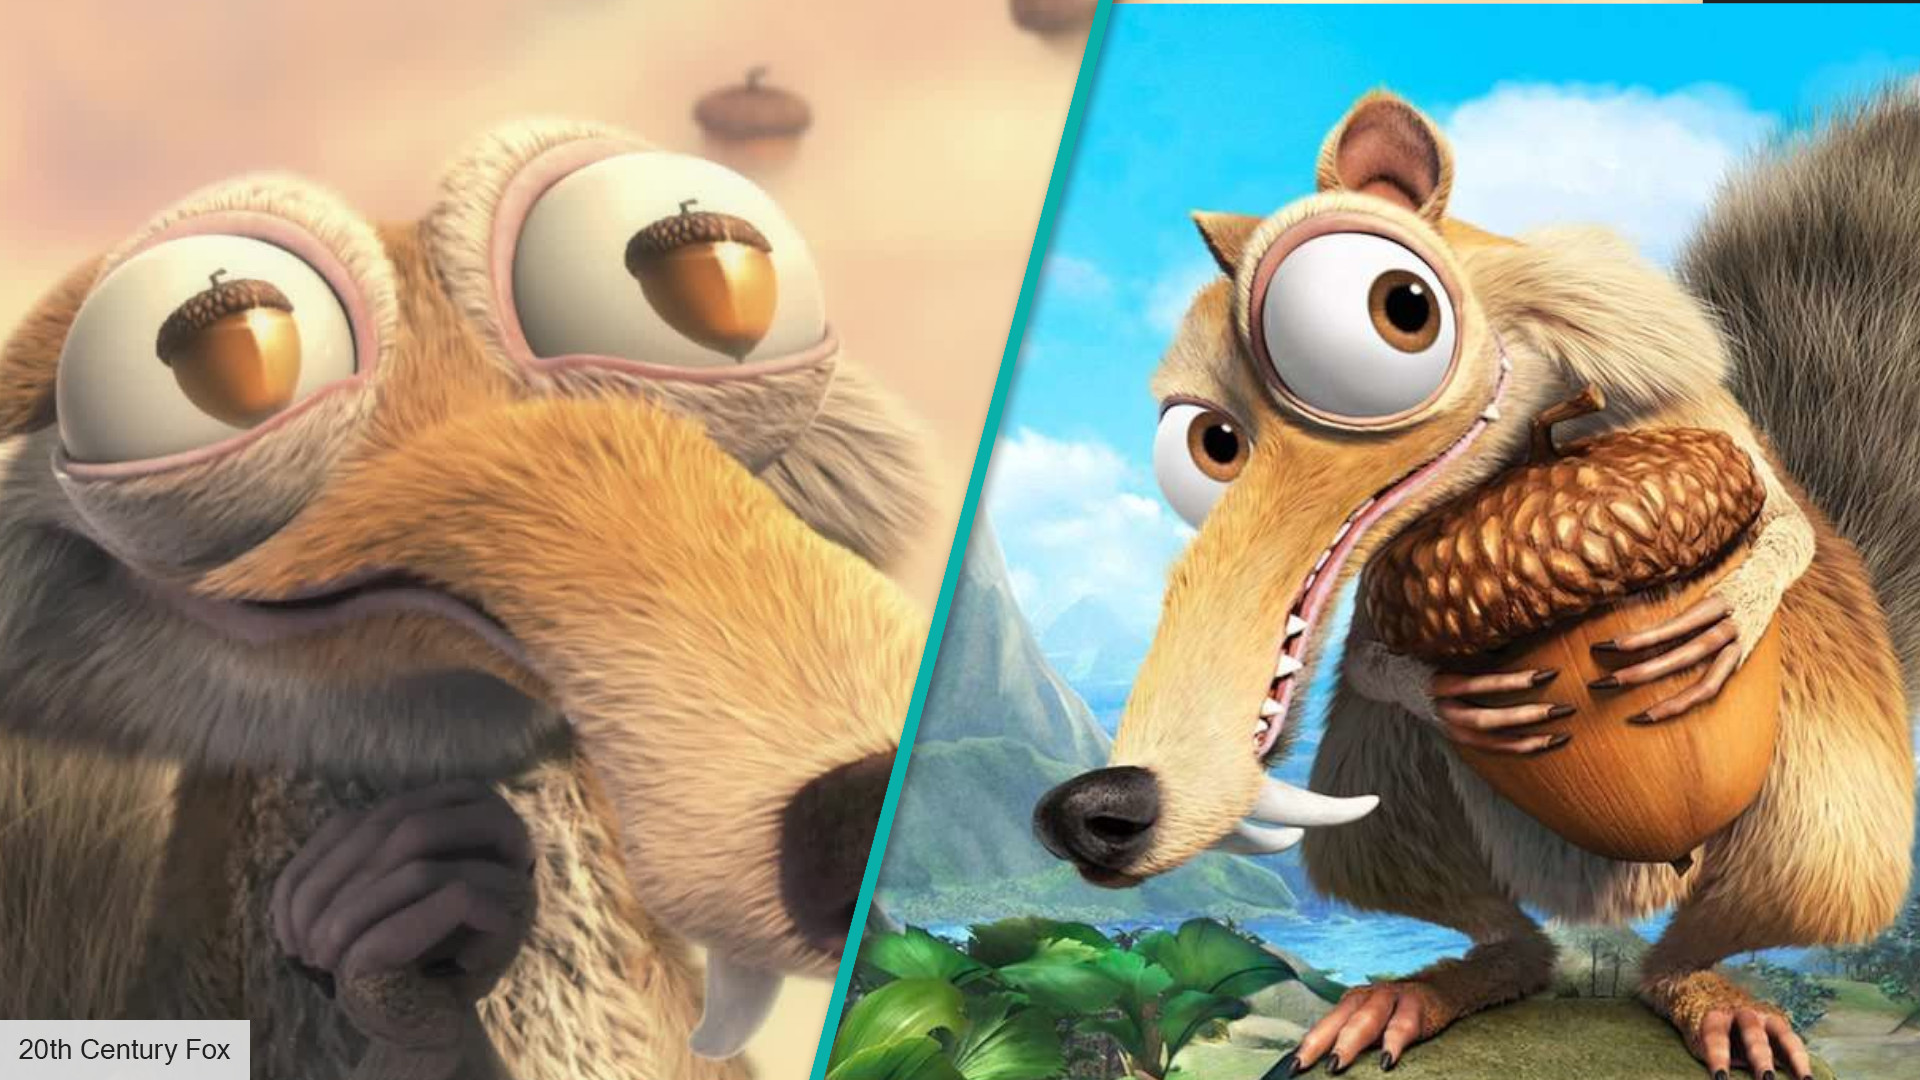 Scrat gets the acorn in goodbye video from Ice Age studio | The Digital Fix